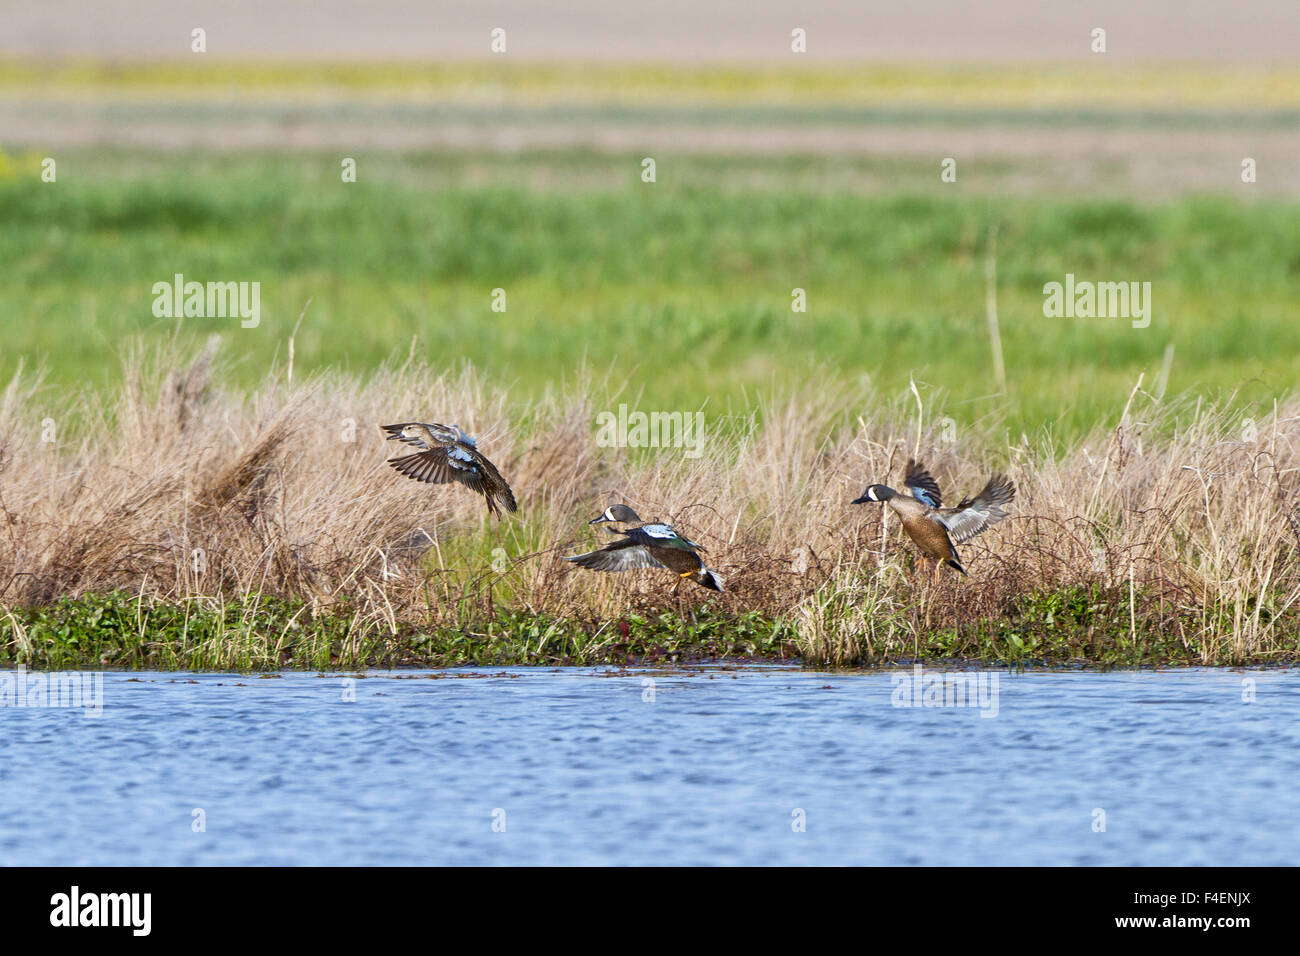 Blue-winged Teal (Anas discors) in flight at wetland, Marion, Illinois, USA. Stock Photo